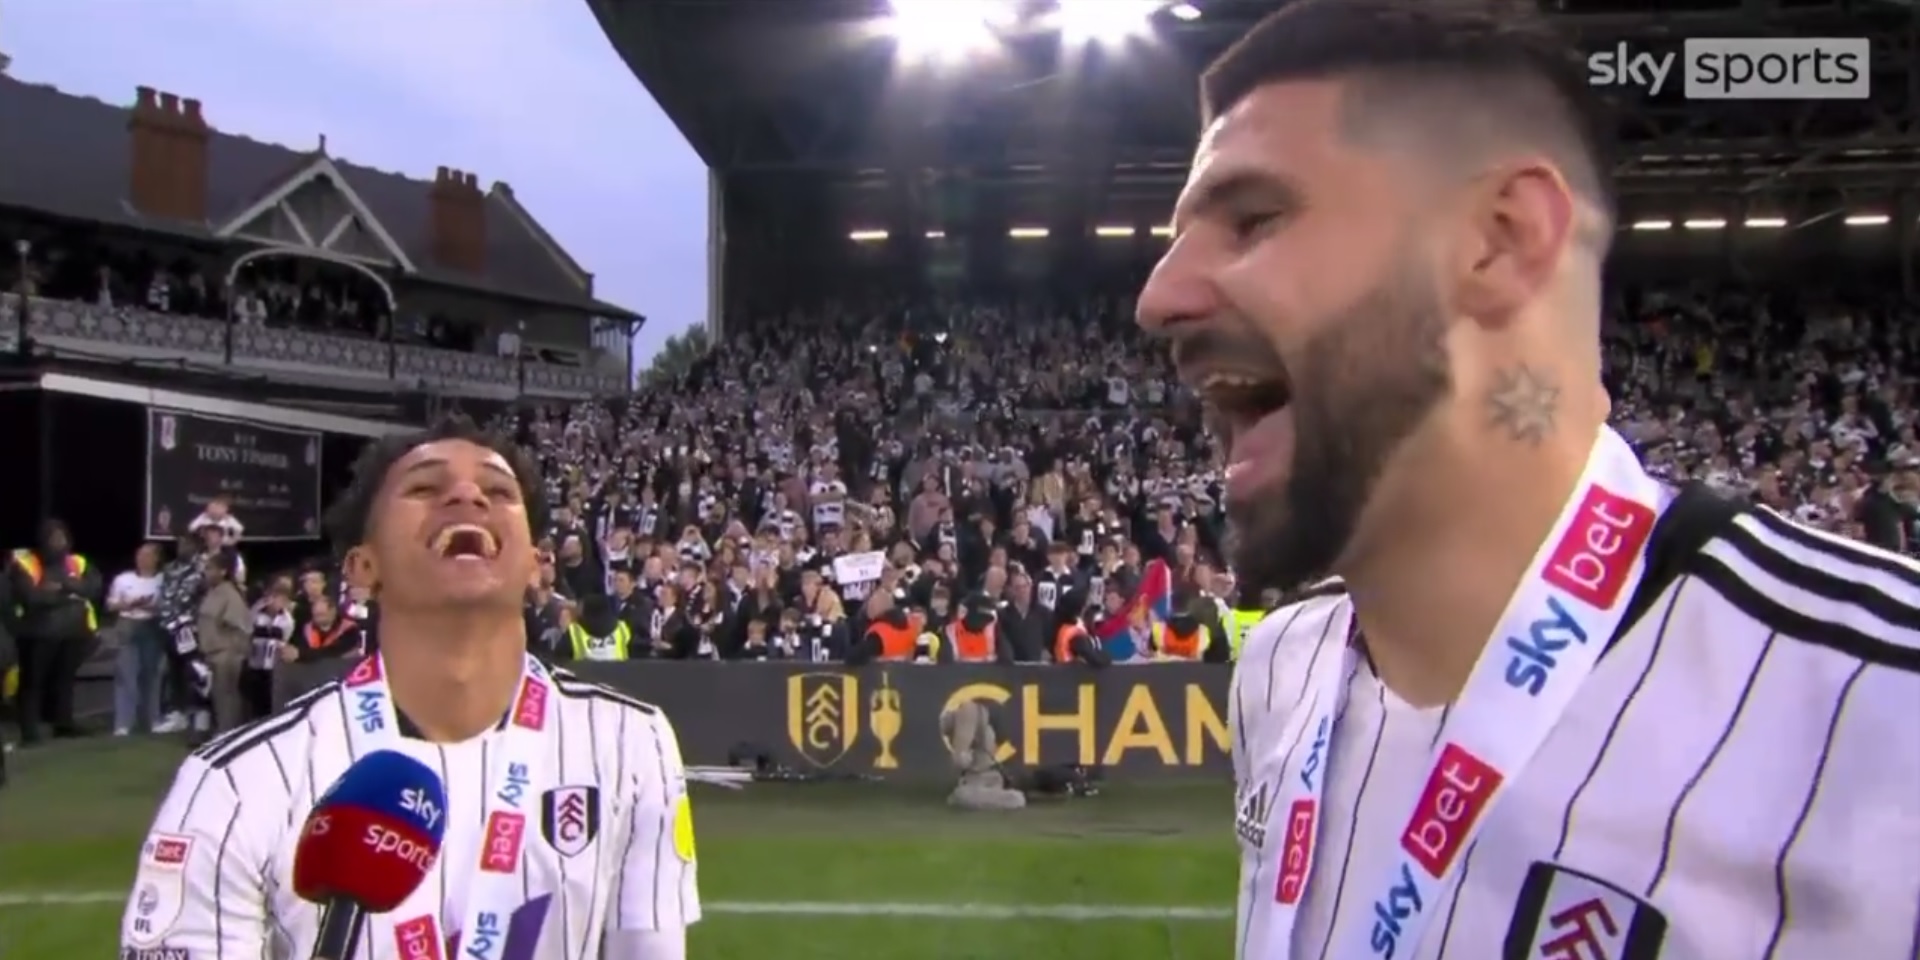 (Video) Carvalho & Mitrovic’s laughing reactions when asked about former’s Liverpool move